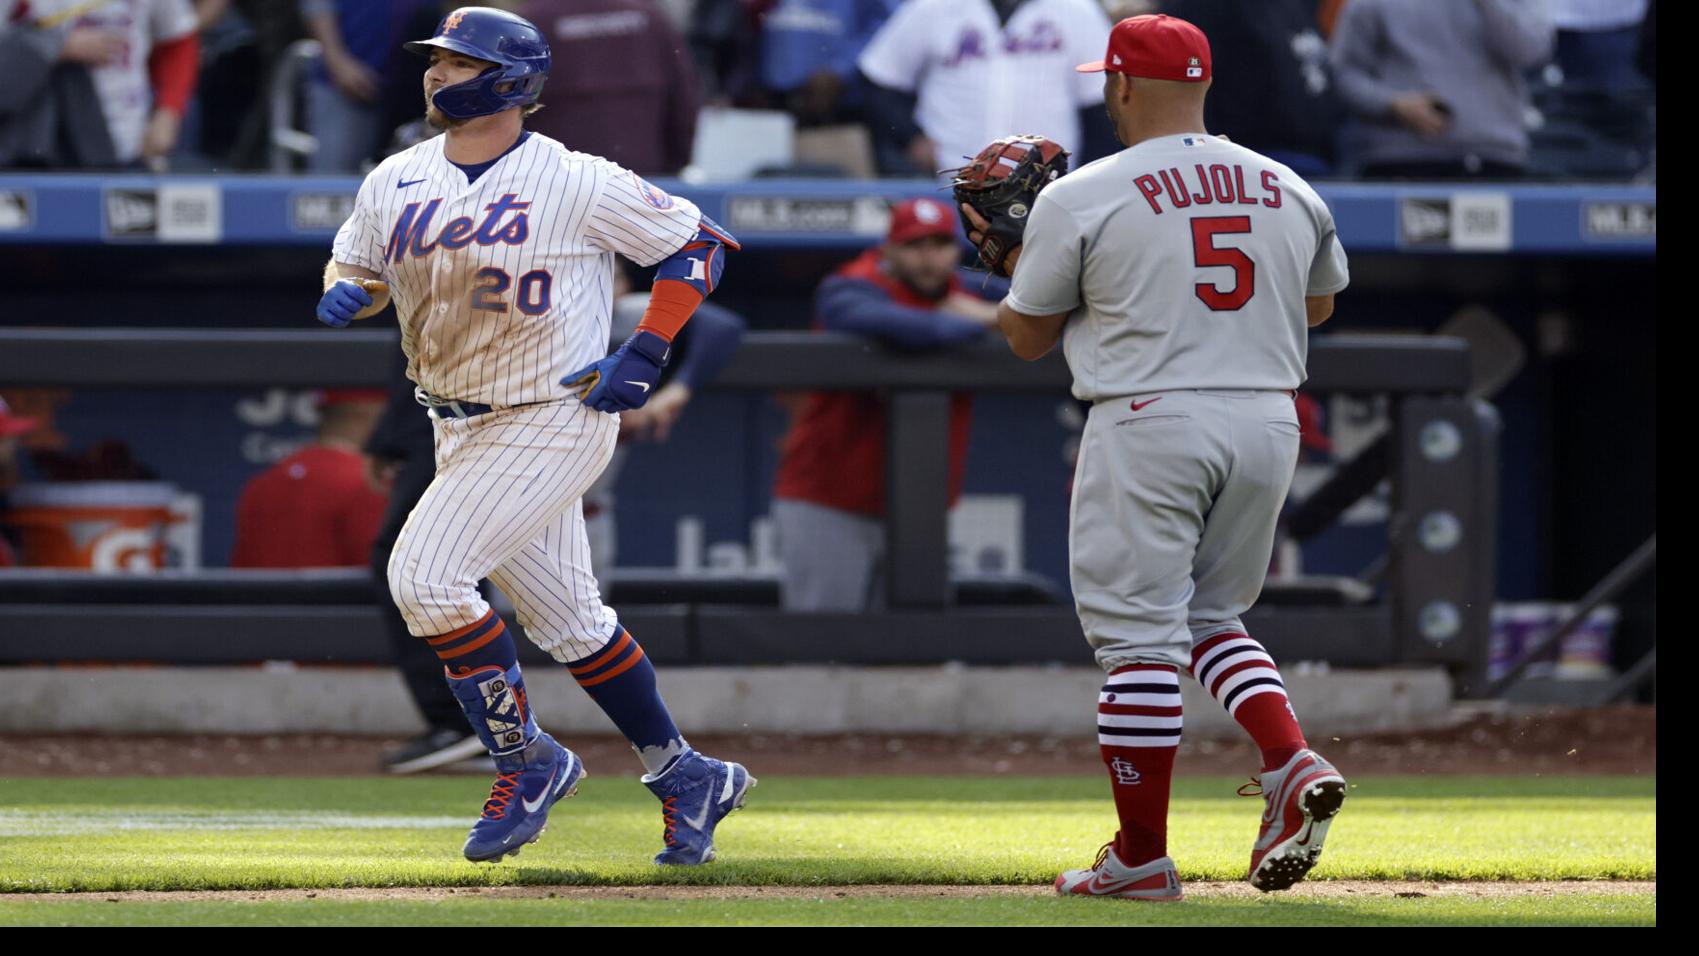 Big league bound: Cardinals call on Gorman, Liberatore to revamp roster after loss to Mets